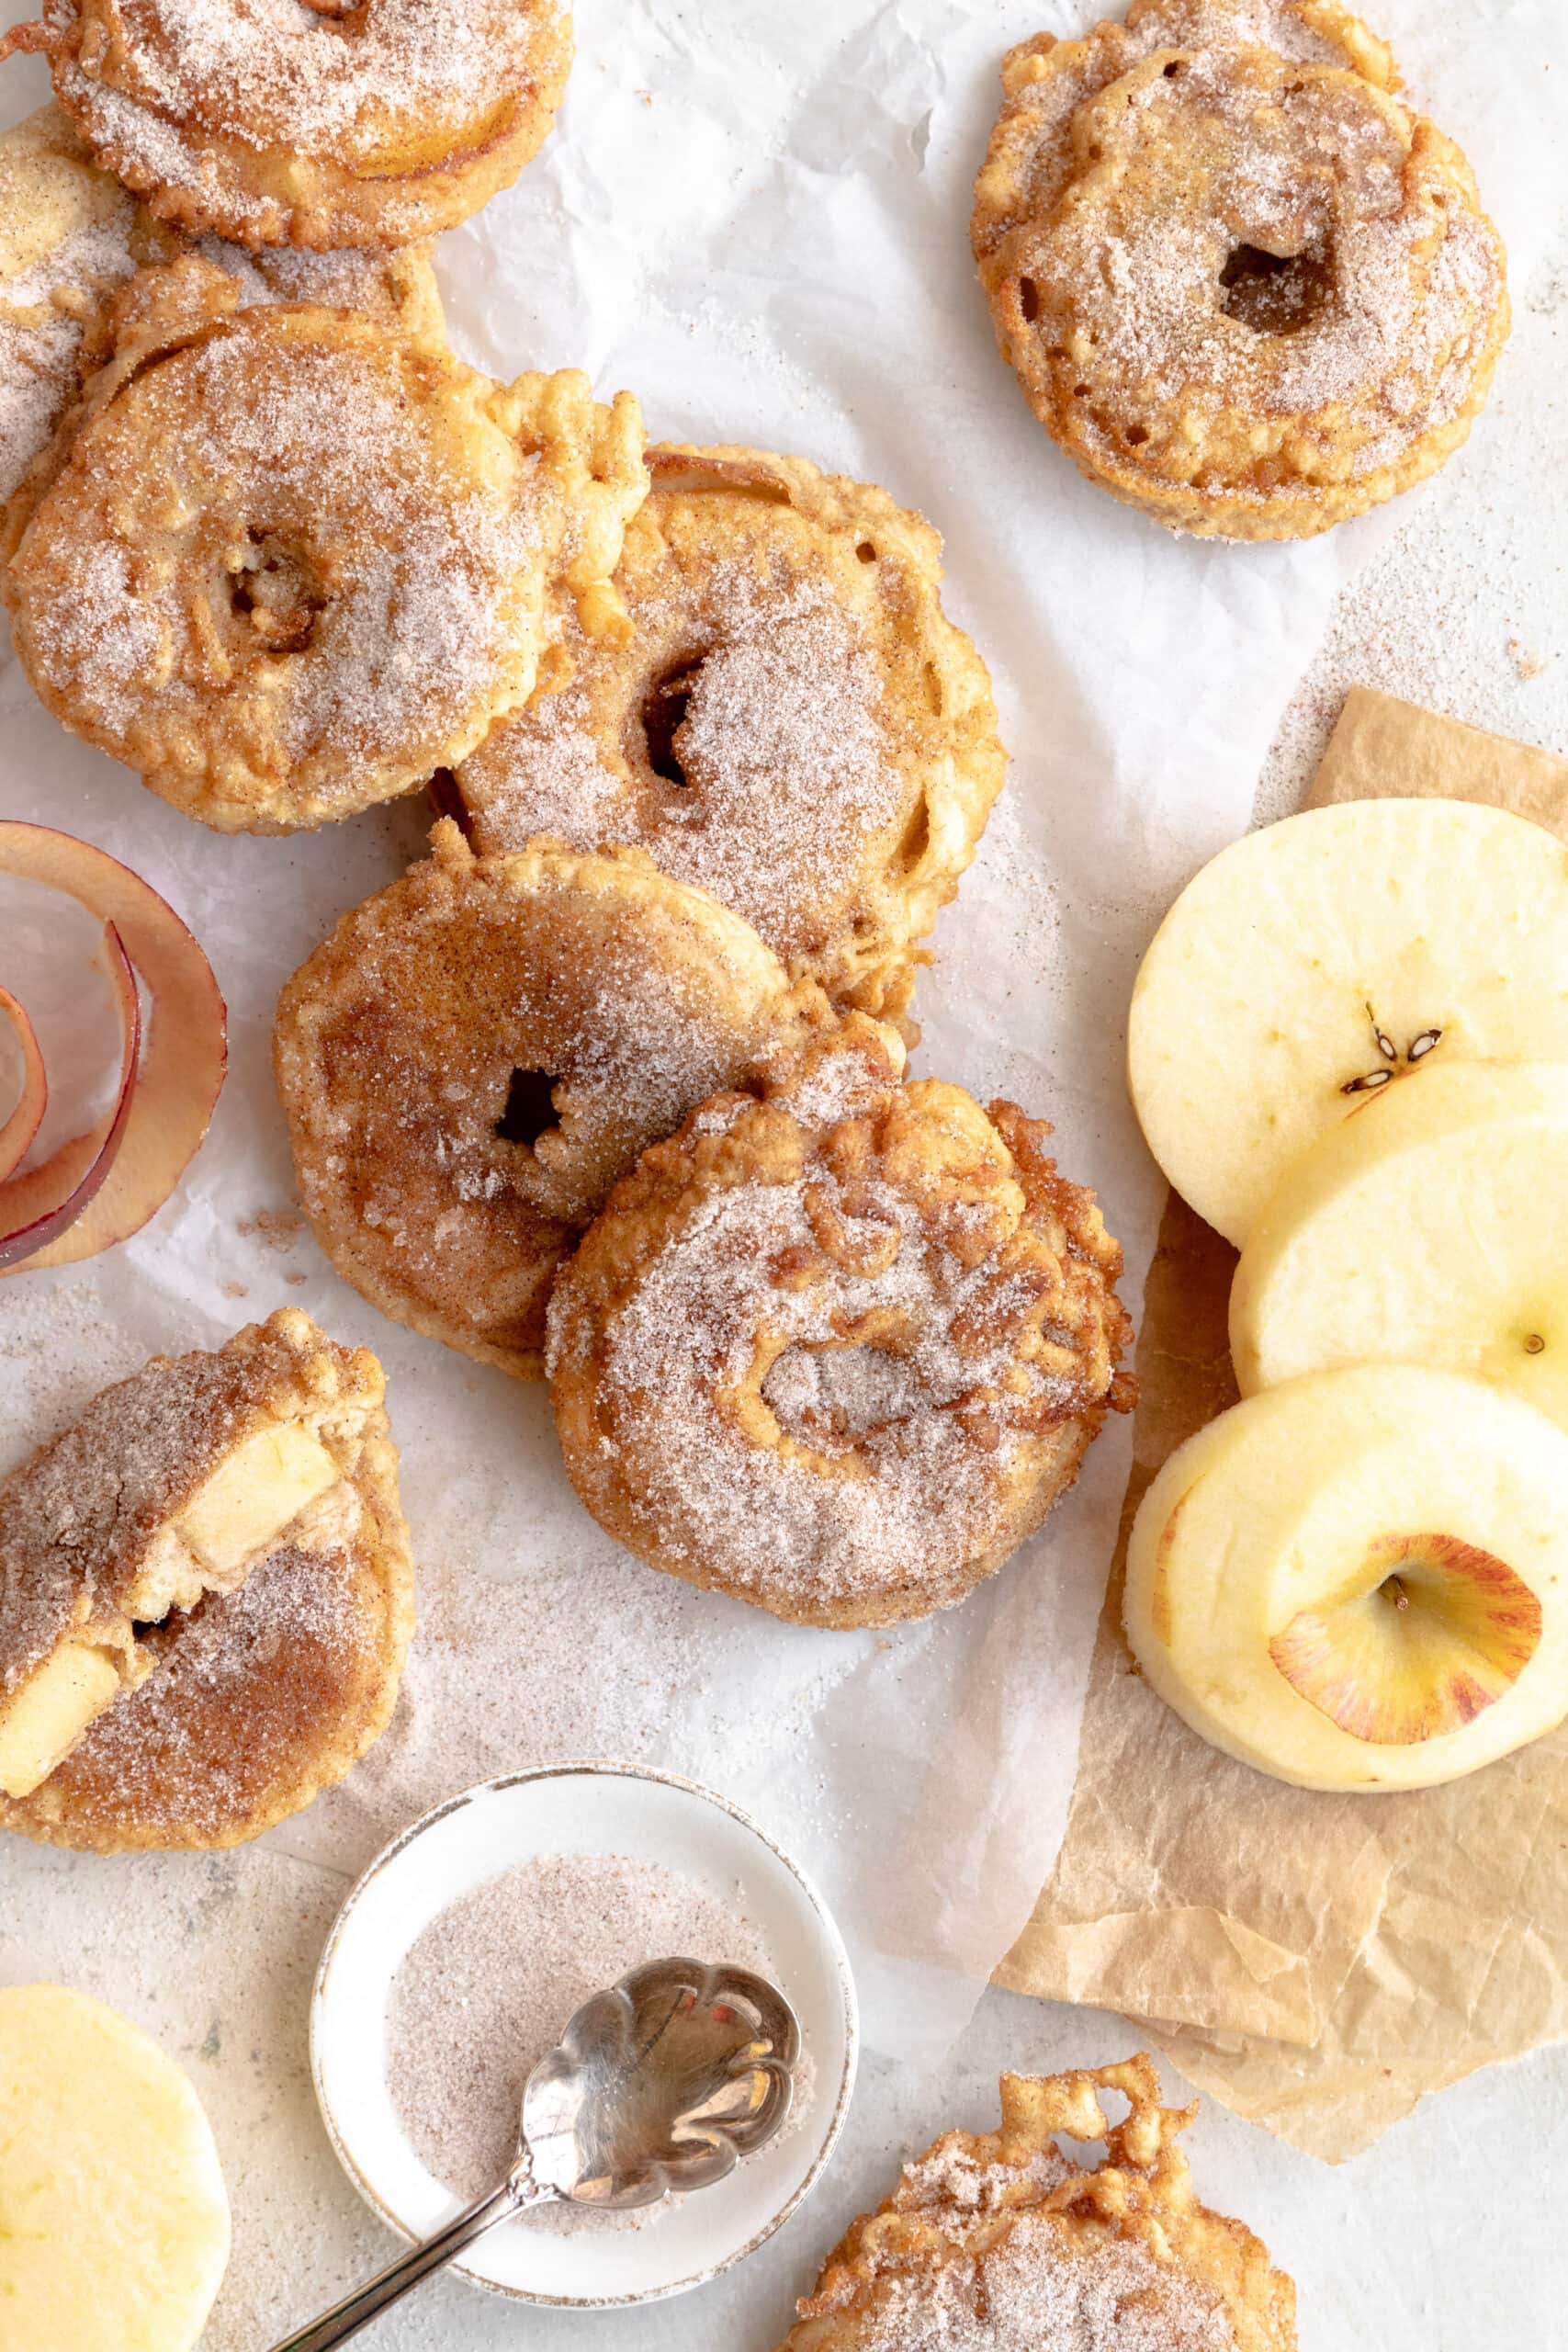 Overhead image of many fried apple rings coated in cinnamon sugar with a few slices of raw fresh apple.